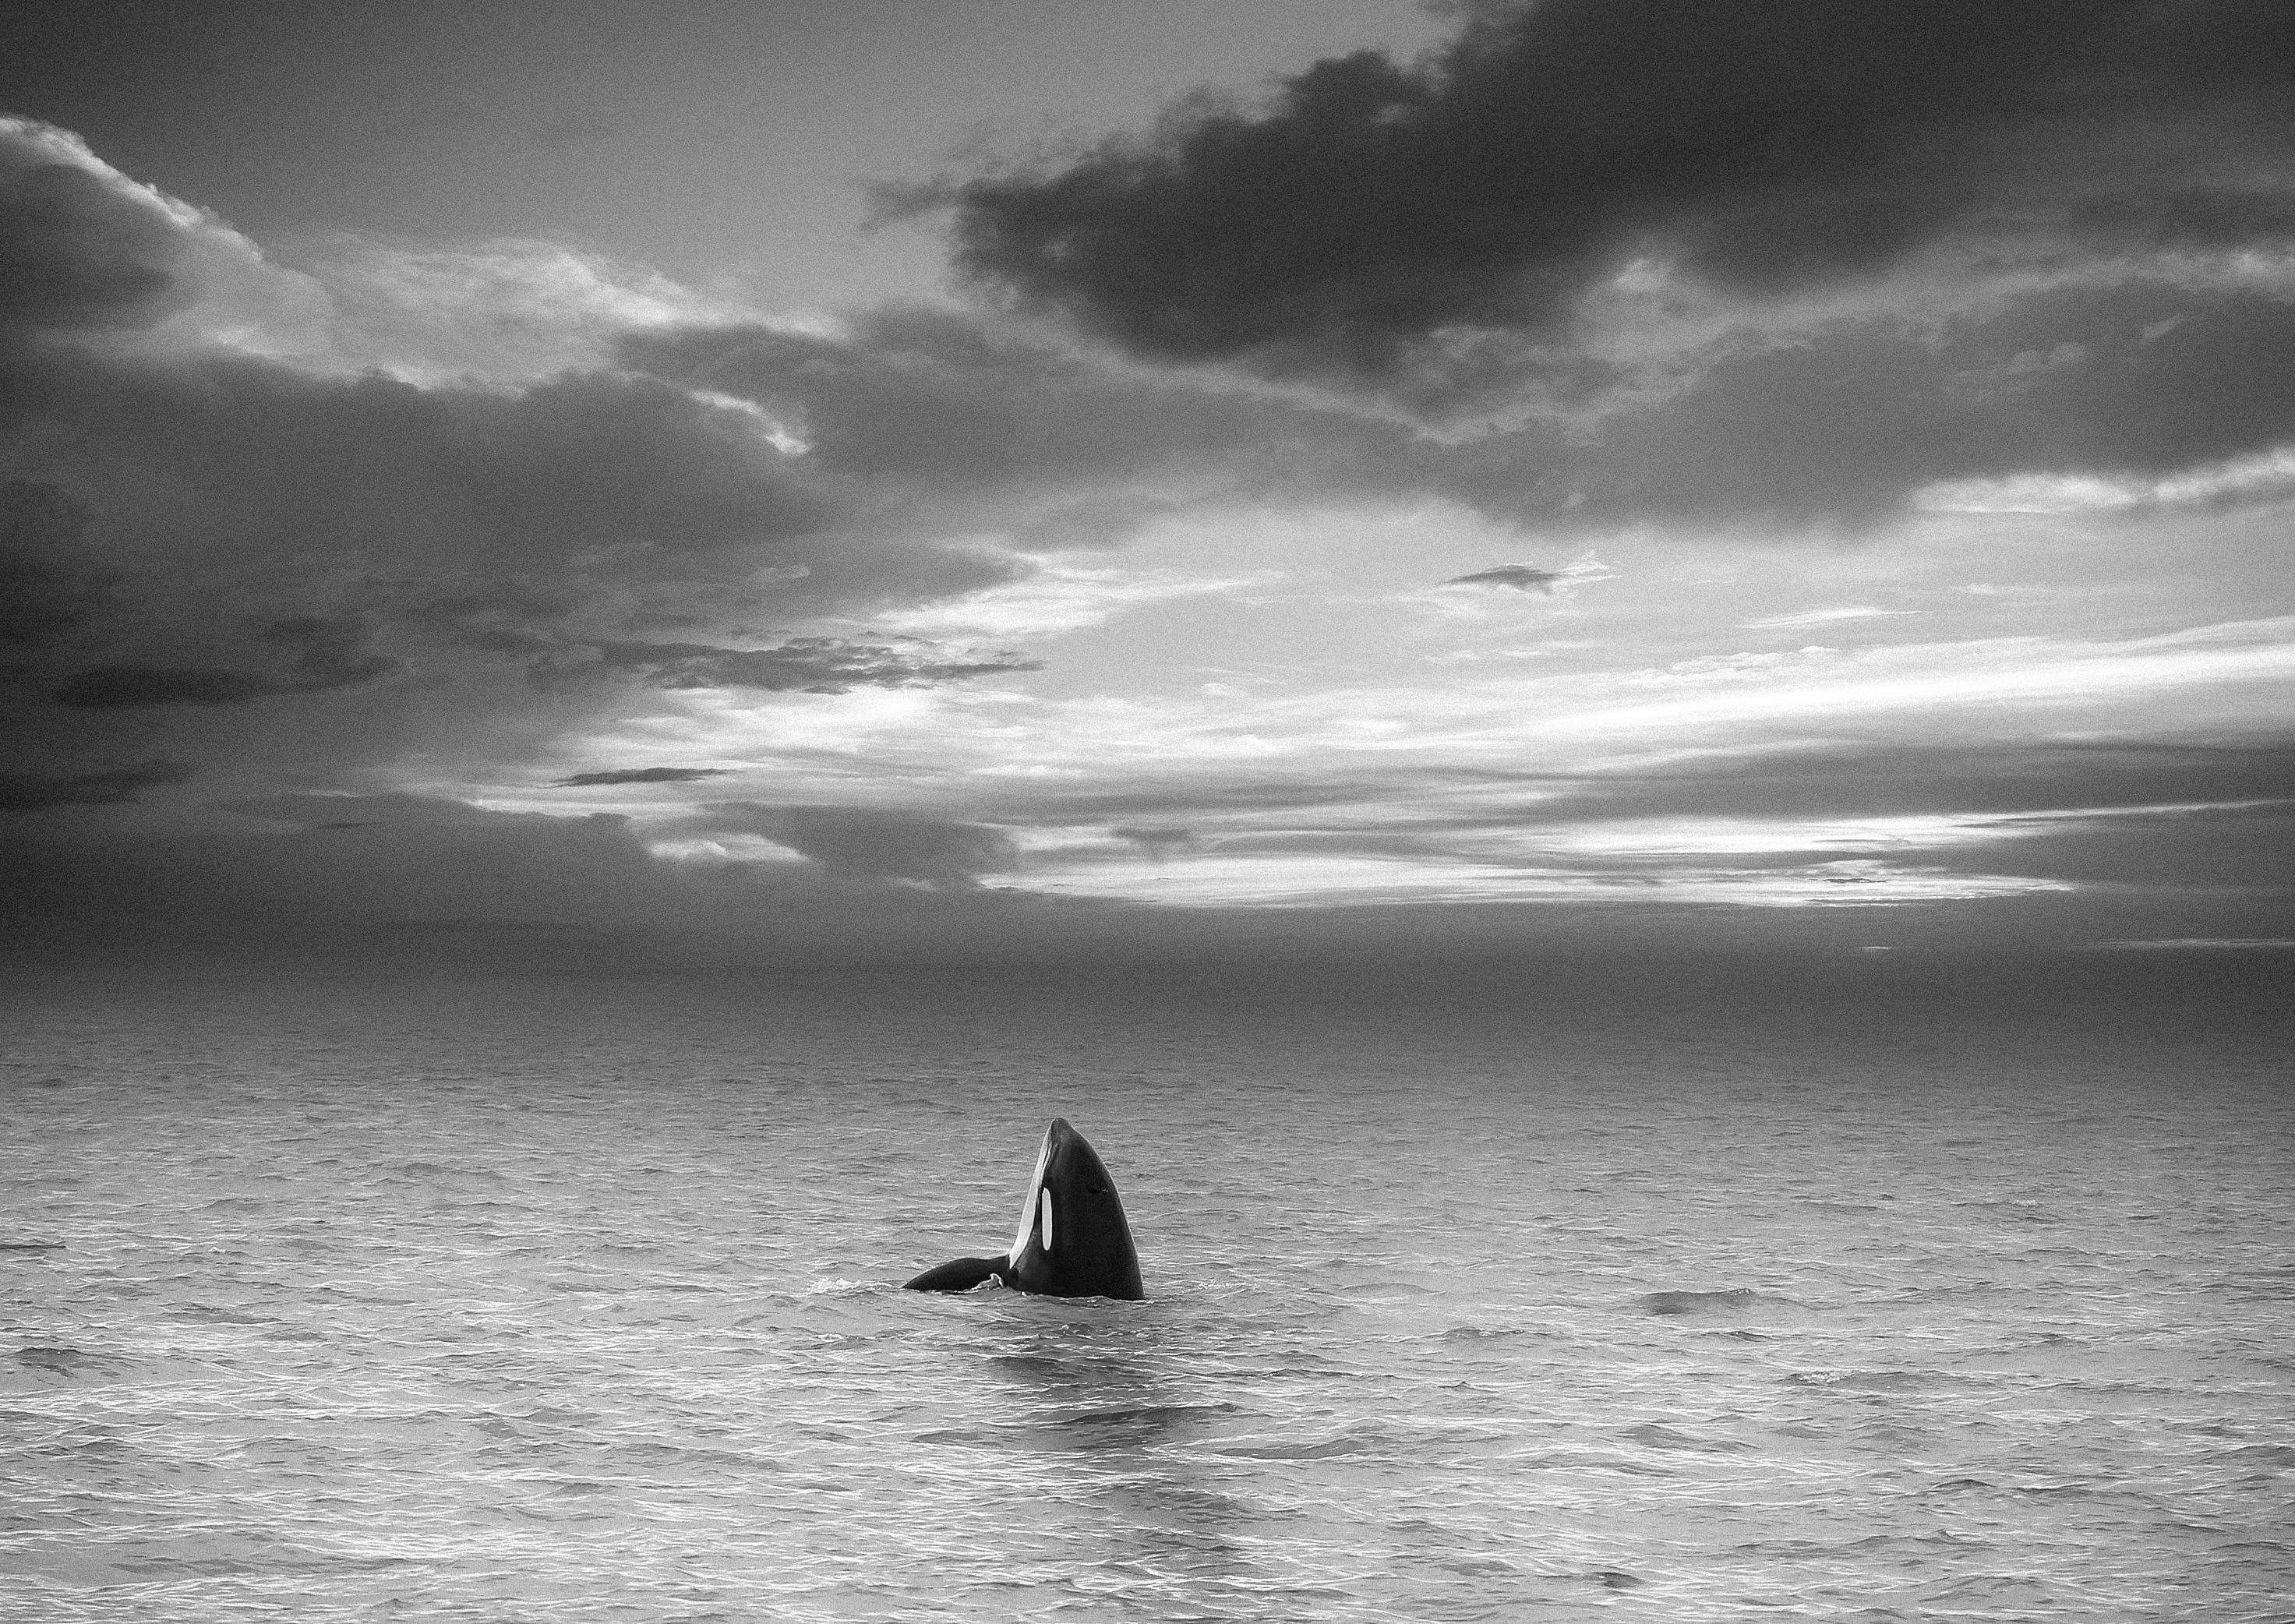 Shane Russeck Animal Print - Orca Photography "36x48" Last Known Photograph of the Killer Whale "Granny" 